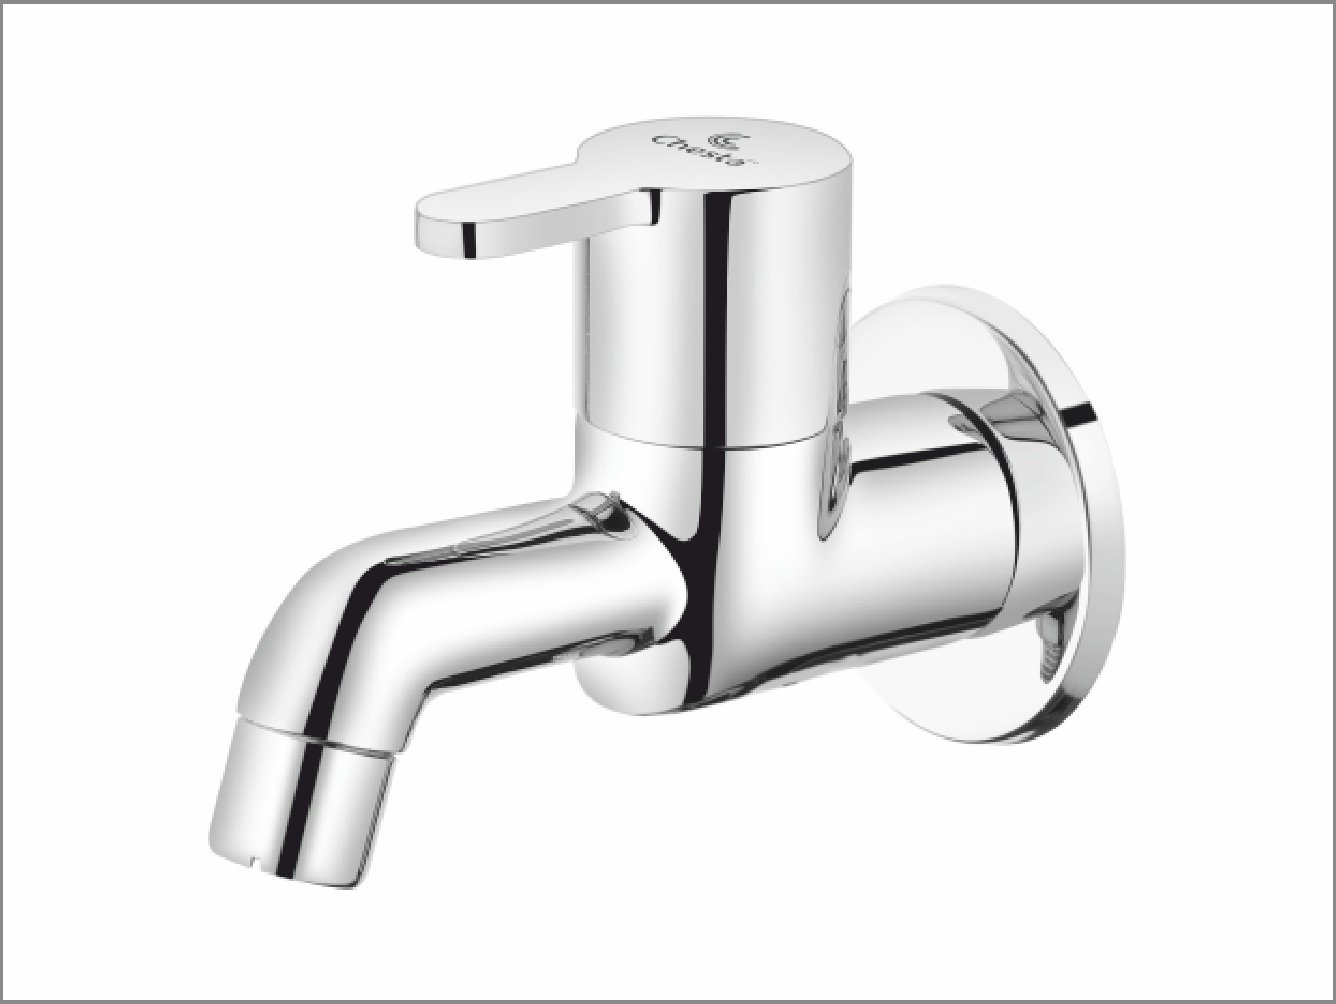 AK - 1001 - Bib Cock with Wall Flange at Chesta Bath Fittings